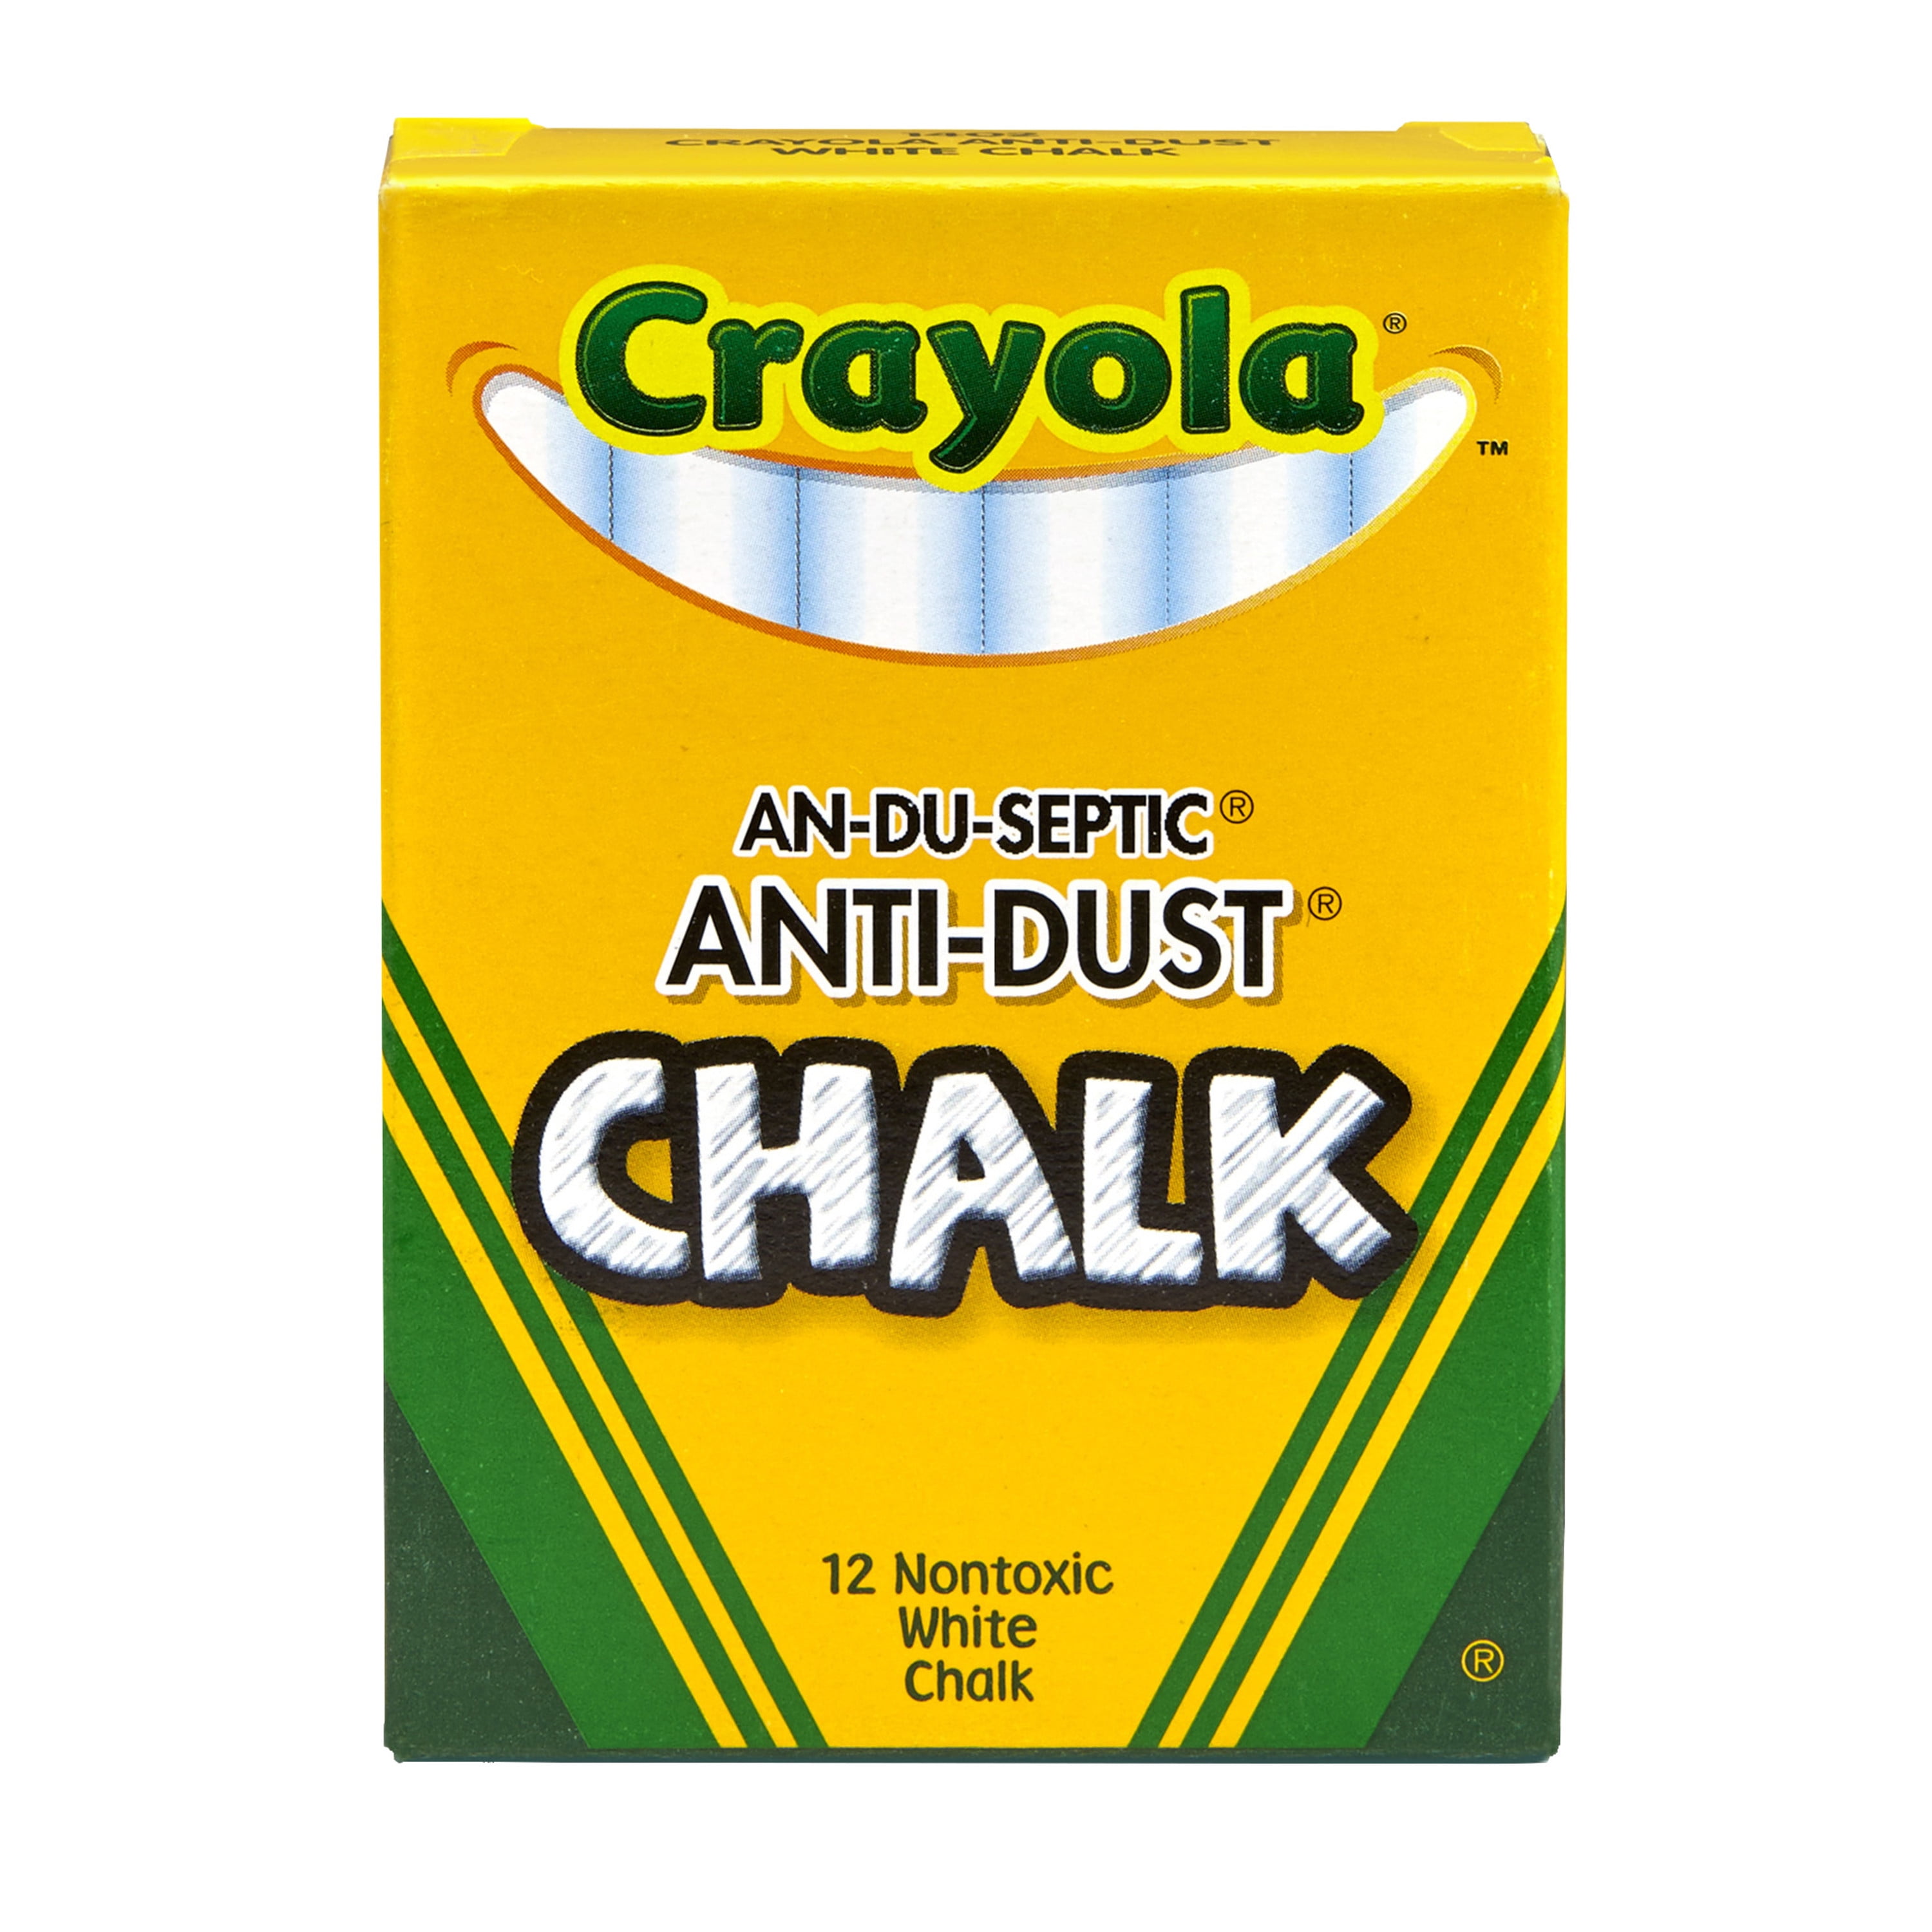 72 Pieces Total Crayola Colored Chalk Non-Toxic 6x12 Pack Free Shipping 